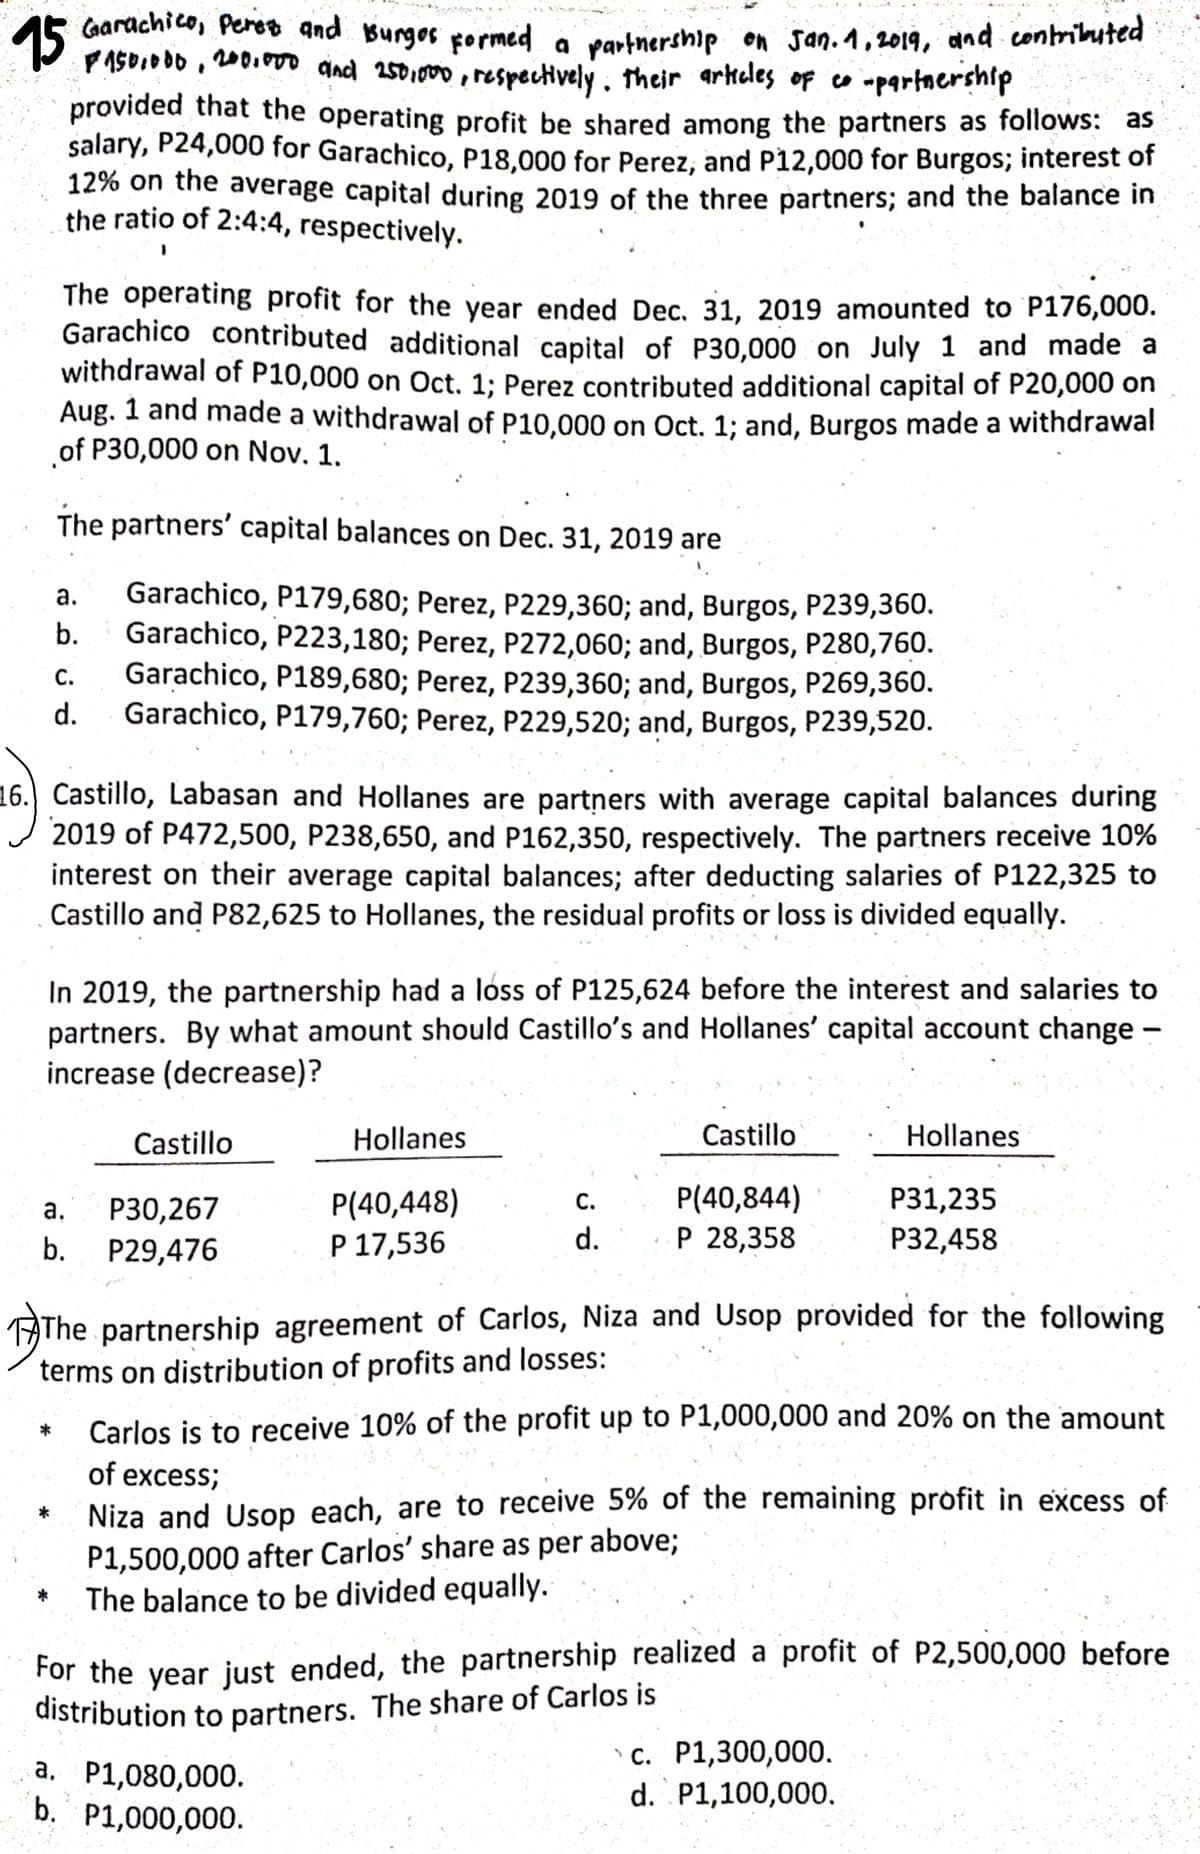 15
PASO.O00 , 200.00 and 2501000, respectively. their arkeles of co -partnership
Carachico, Peros and Burgos pormed a
partnership on san.1,2019, and contriluted
provided that the operating profit be shared among the partners as follows: as
salary, P24,000 for Garachico, P18,000 for Perez, and P12,000 for Burgos; interest of
12% on the average capital during 2019 of the three partners; and the balance in
the ratio of 2:4:4, respectively.
The operating profit for the year ended Dec, 31, 2019 amounted to P176,000.
Garachico contributed additional capital of P30,000 on July 1 and made a
withdrawal of P10,000 on Oct. 1; Perez contributed additional capital of P20,000 on
Aug. 1 and made a withdrawal of P10.000 on Oct. 1; and, Burgos made a withdrawal
of P30,000 on Nov. 1.
The partners' capital balances on Dec. 31, 2019 are
Garachico, P179,680; Perez, P229,360; and, Burgos, P239,360.
Garachico, P223,180; Perez, P272,060; and, Burgos, P280,760.
Garachico, P189,680; Perez, P239,360; and, Burgos, P269,360.
Garachico, P179,760; Perez, P229,520; and, Burgos, P239,520.
а.
b.
С.
d.
16. Castillo, Labasan and Hollanes are partners with average capital balances during
2019 of P472,500, P238,650, and P162,350, respectively. The partners receive 10%
interest on their average capital balances; after deducting salaries of P122,325 to
Castillo and P82,625 to Hollanes, the residual profits or loss is divided equally.
In 2019, the partnership had a loss of P125,624 before the interest and salaries to
partners. By what amount should Castillo's and Hollanes' capital account change –
increase (decrease)?
Castillo
Hollanes
Castillo
Hollanes
P(40,844)
Р 28,358
Р31,235
P(40,448)
Р 17,536
а.
Р30,267
С.
b.
P29,476
d.
P32,458
The partnership agreement of Carlos, Niza and Usop provided for the following
terms on distribution of profits and losses:
Carlos is to receive 10% of the profit up to P1,000,000 and 20% on the amount
*
of excess;
Niza and Usop each, are to receive 5% of the remaining profit in excess of
P1,500,000 after Carlos' share as per above;
The balance to be divided equally.
For the year just ended, the partnership realized a profit of P2,500,000 before
distribution to partners. The share of Carlos is
a, P1,080,000.
b. P1,000,000.
с. Р1,300,000.
d. P1,100,000.
а.
